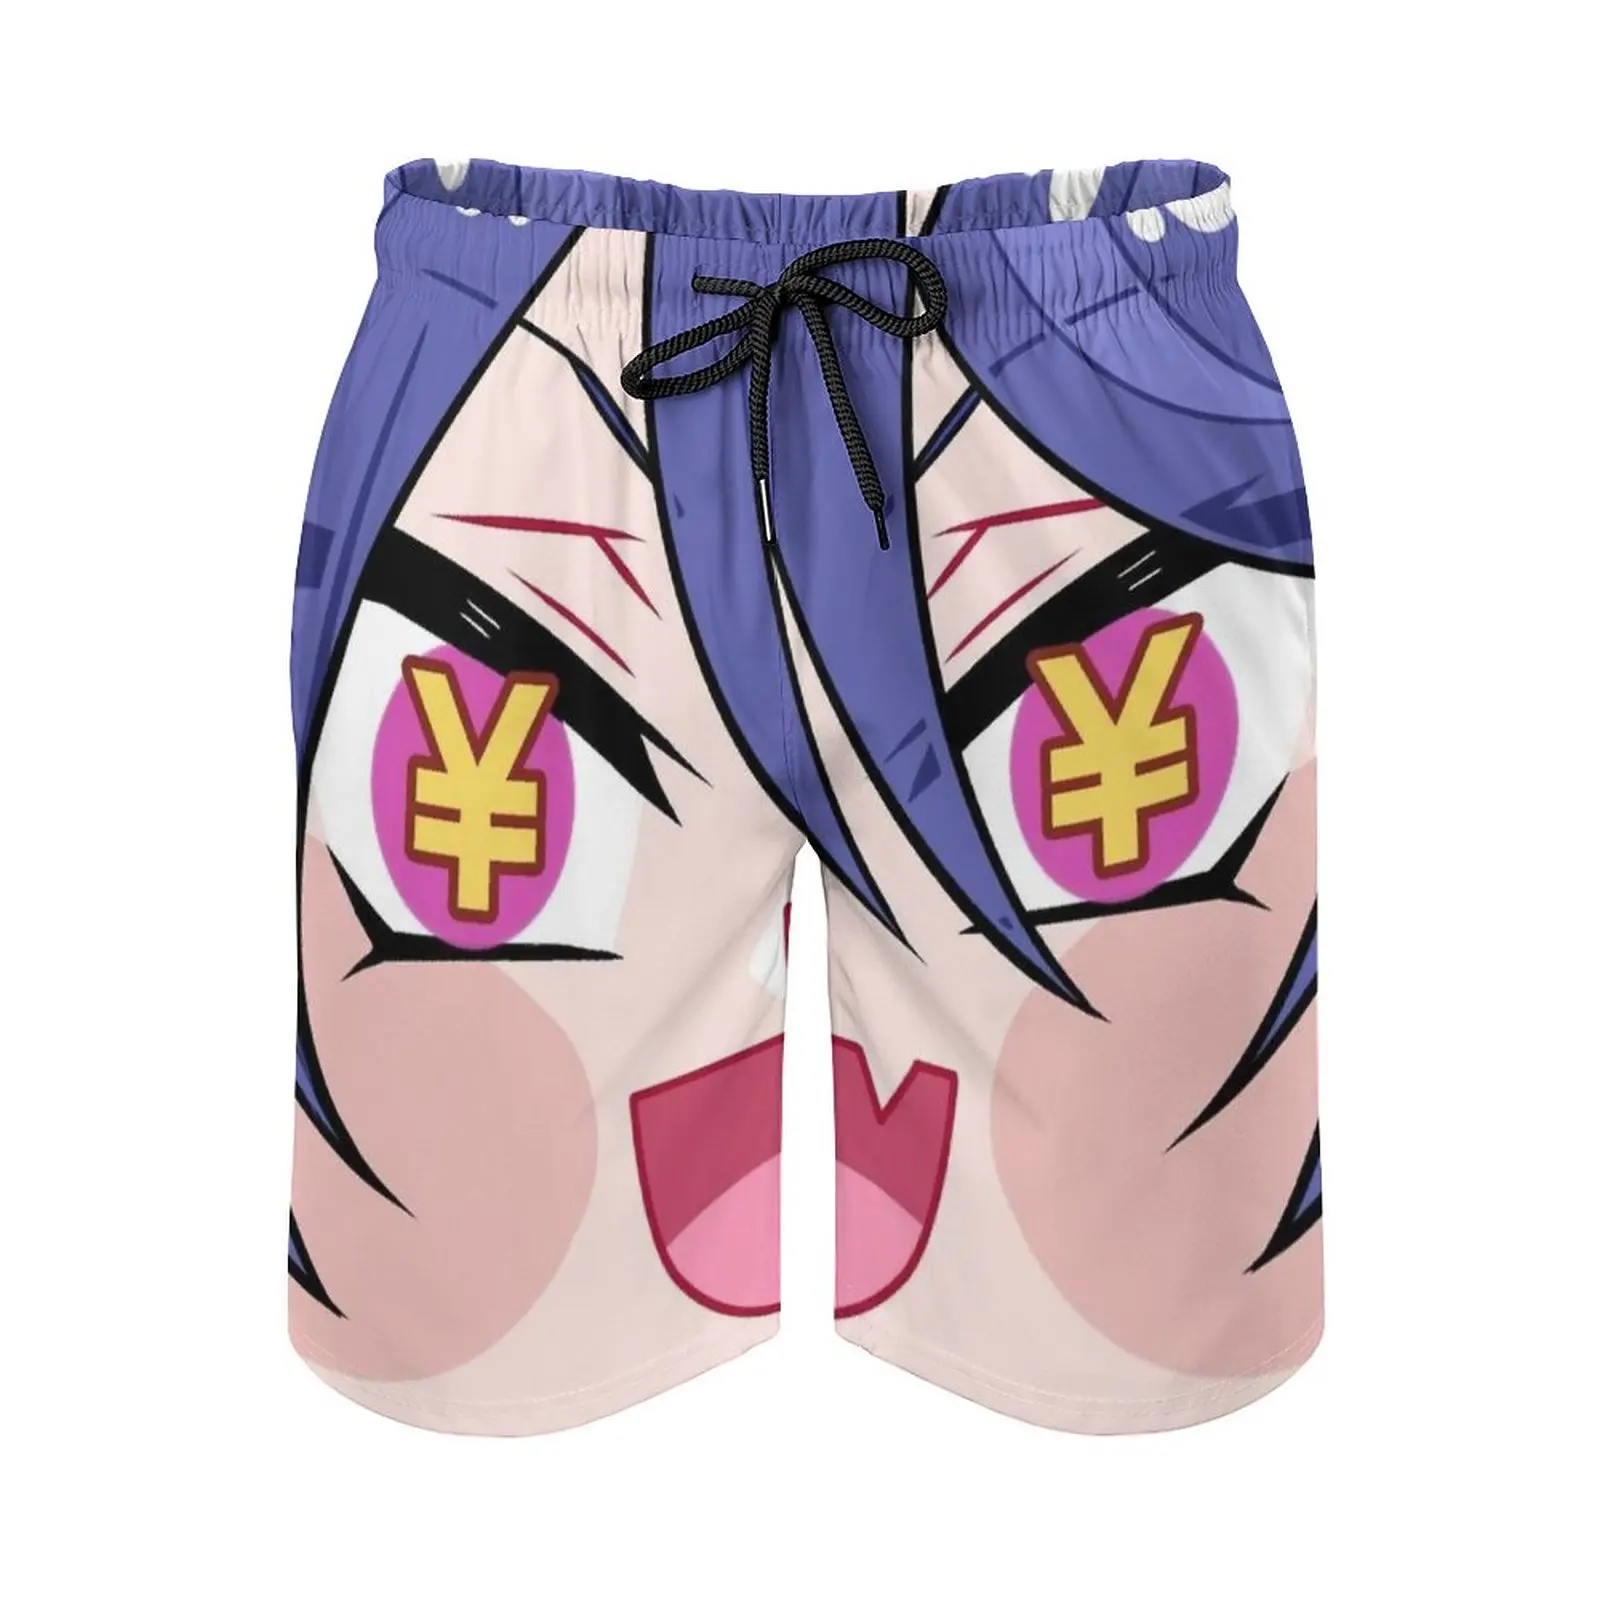 Dice Men'S Swim Trunks Quick Dry Volley Beach Shorts With Pockets For Men'S Hypnosis Mic Hypmic Ramuda Hypnosis Mic Amemura